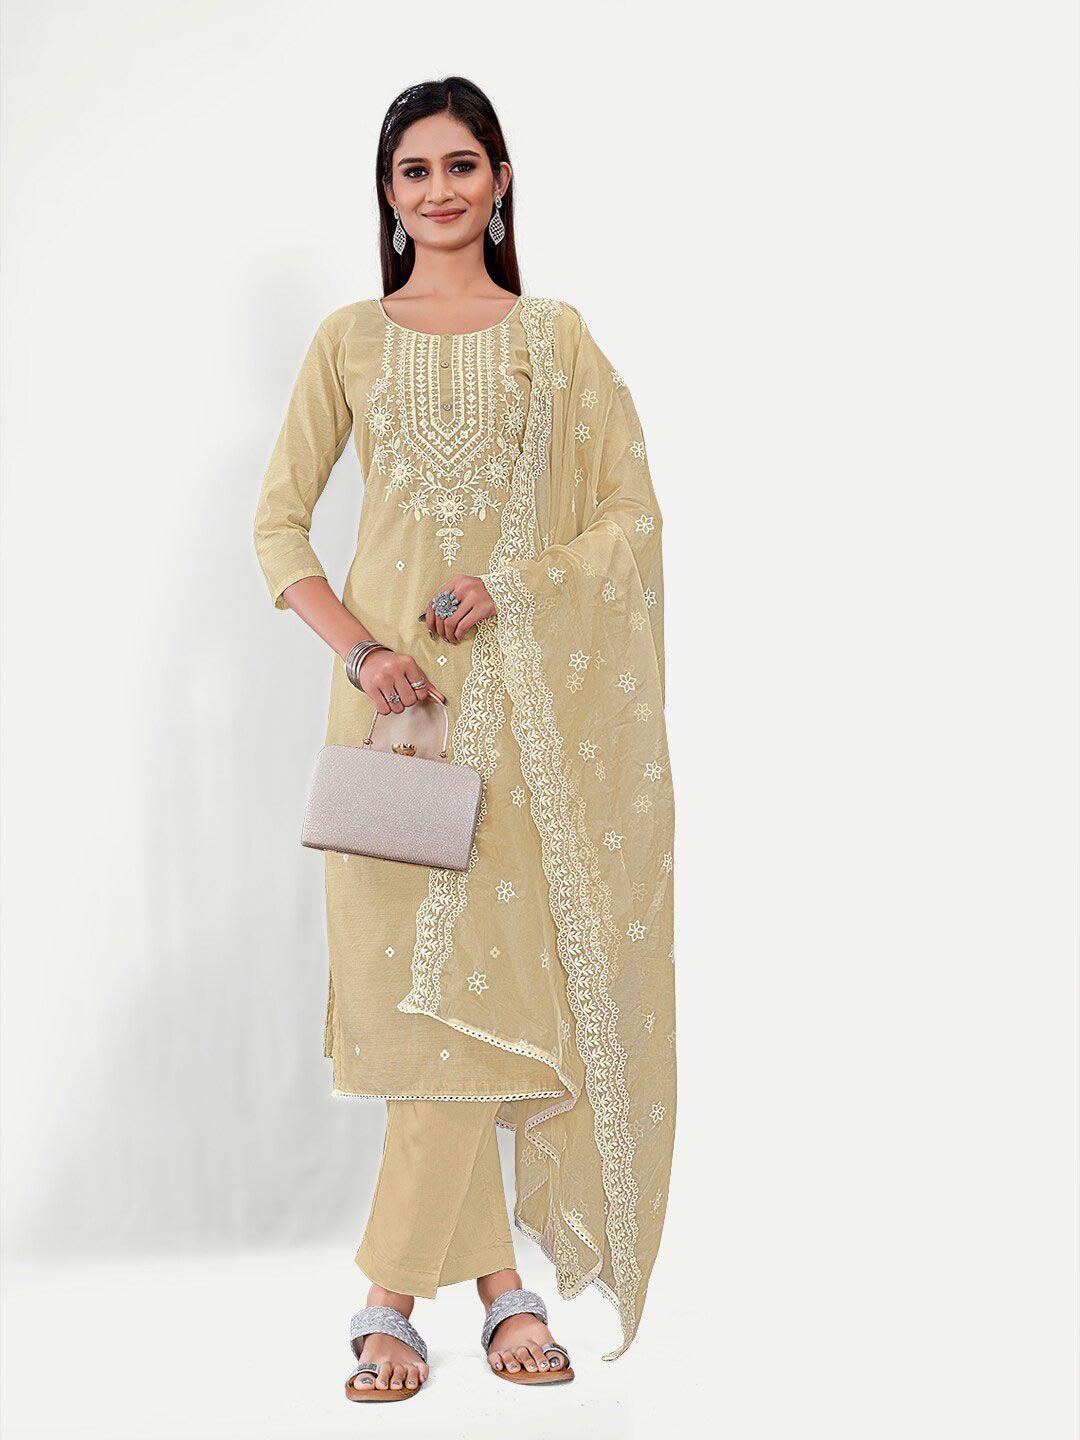 TAVAS Brown & White Embroidered Unstitched Dress Material